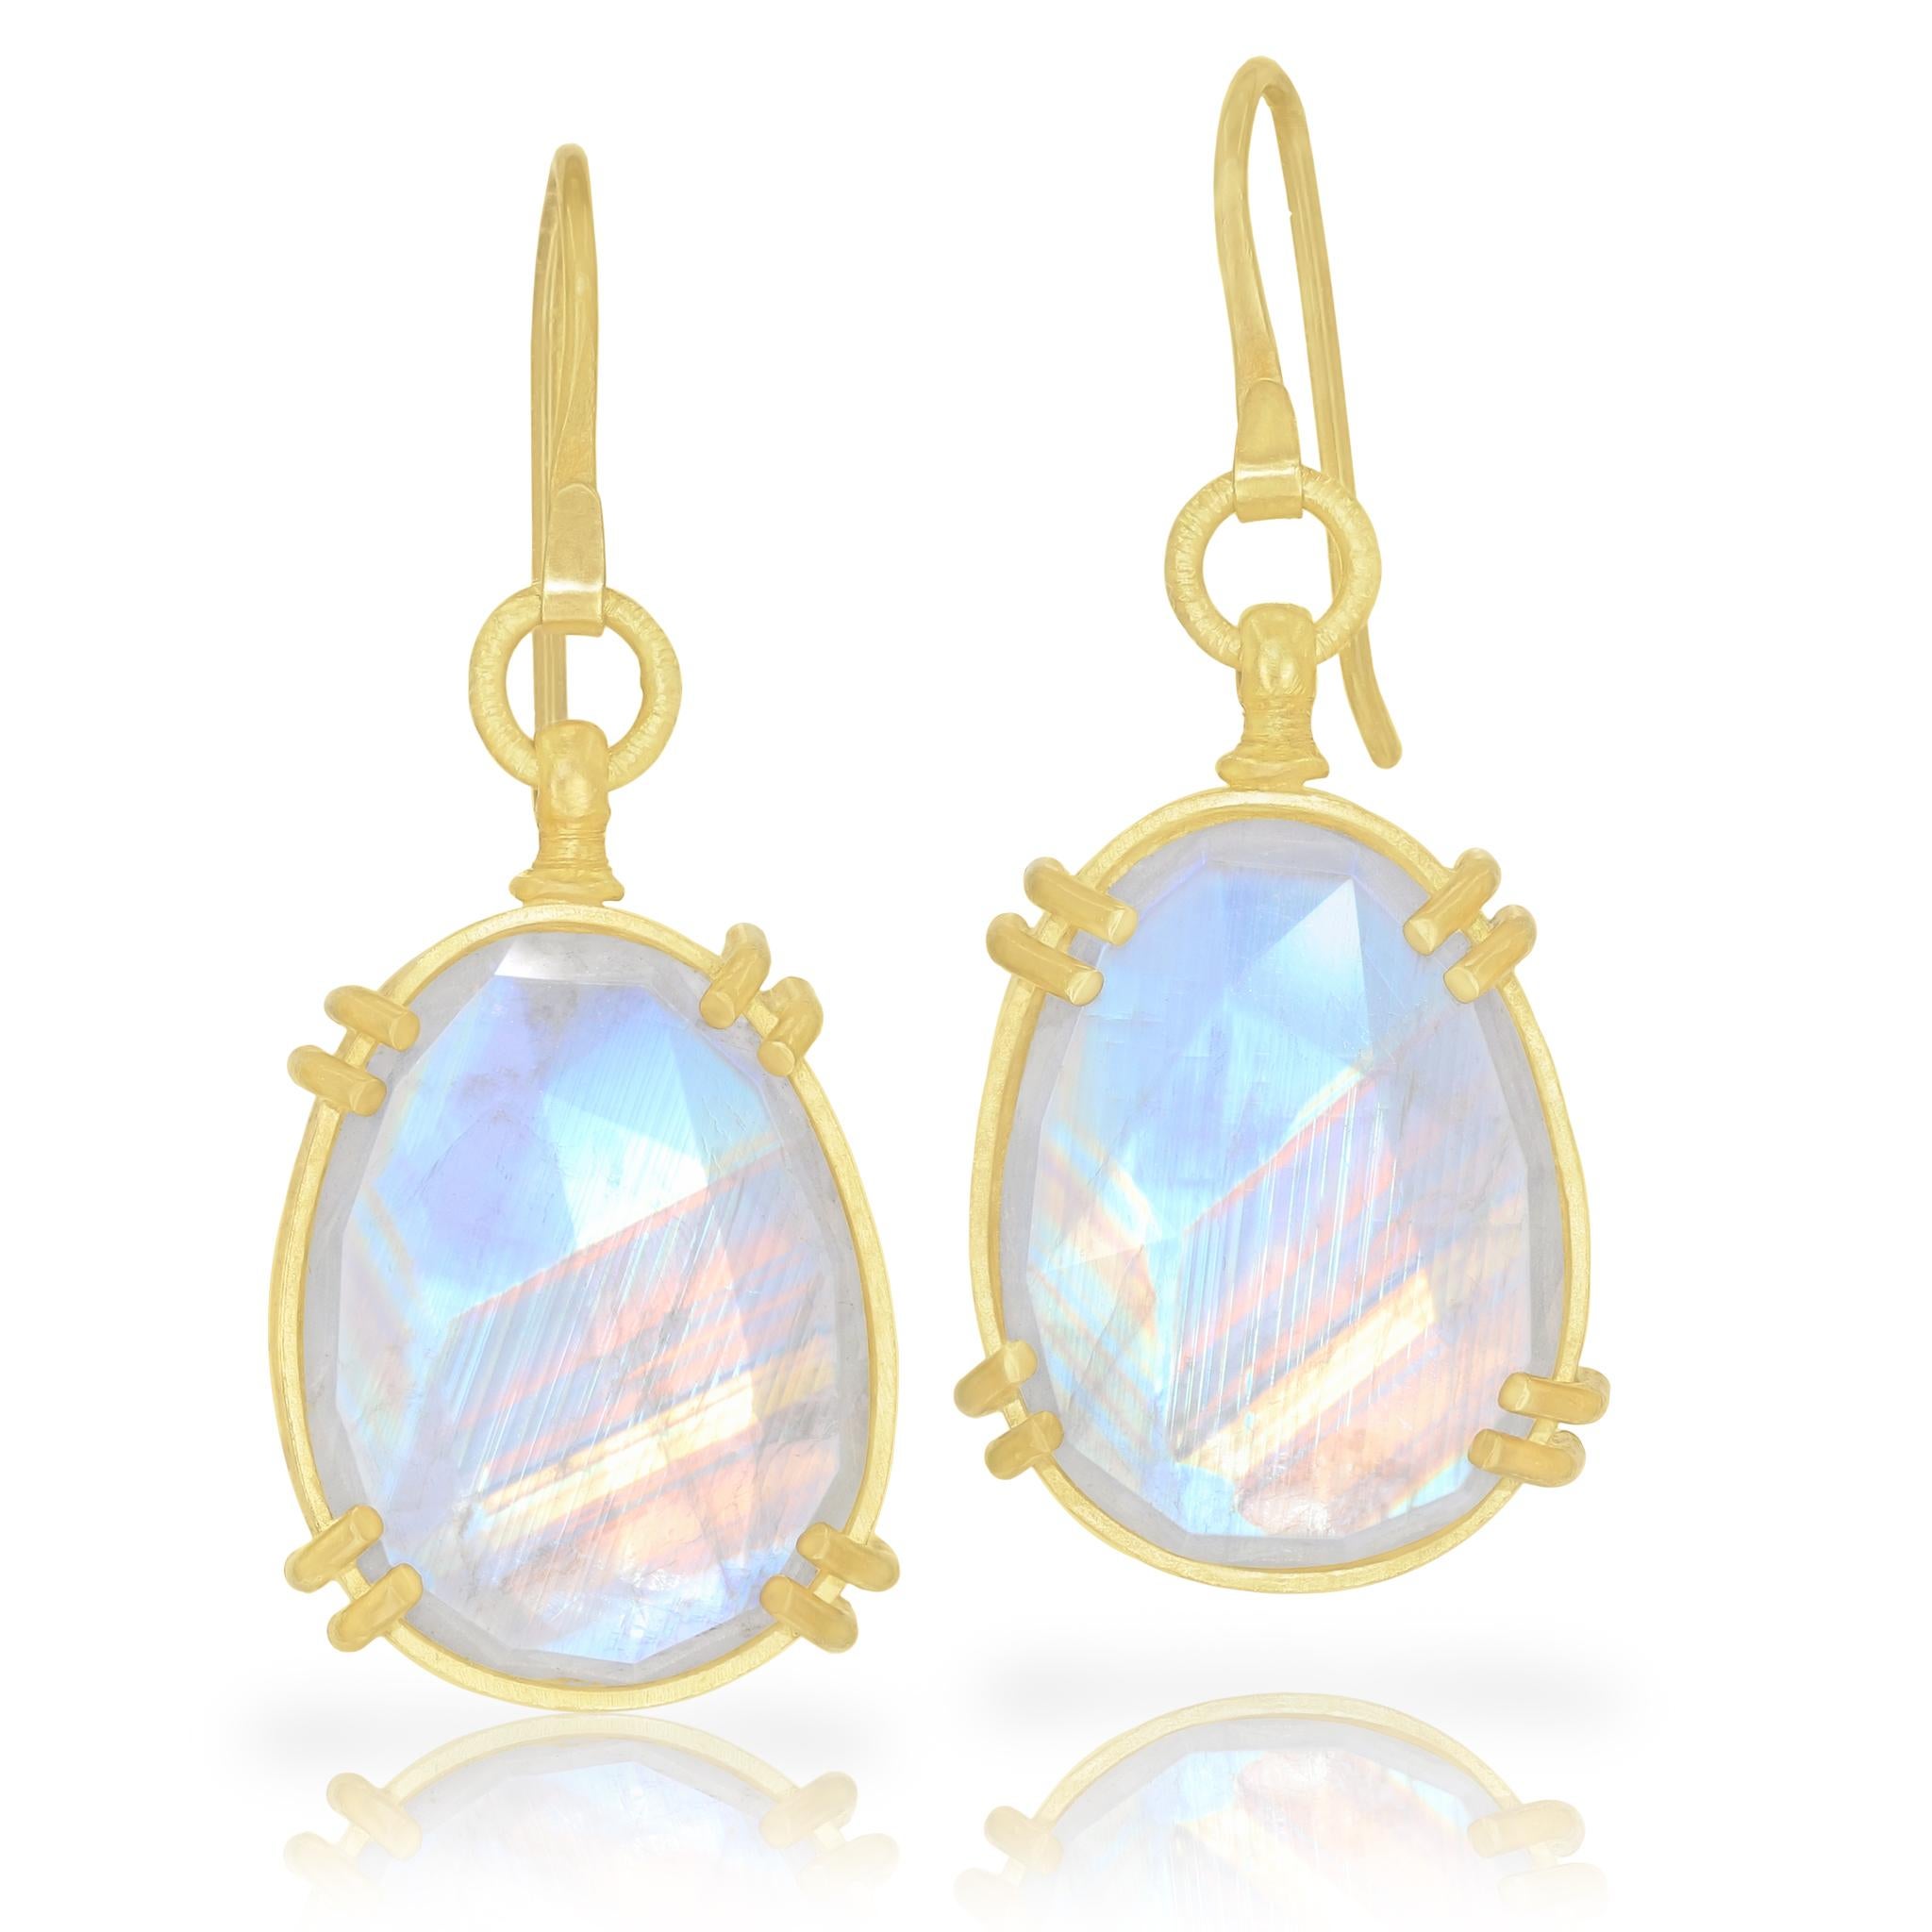 One of a Kind Earrings hand-fabricated by master jewelry maker Lilly Fitzgerald featuring an exceptional quality, very rare pair of faceted rose-cut rainbow moonstones totaling 16.5 carats, lit dramatically with rainbow adularesence in a striated